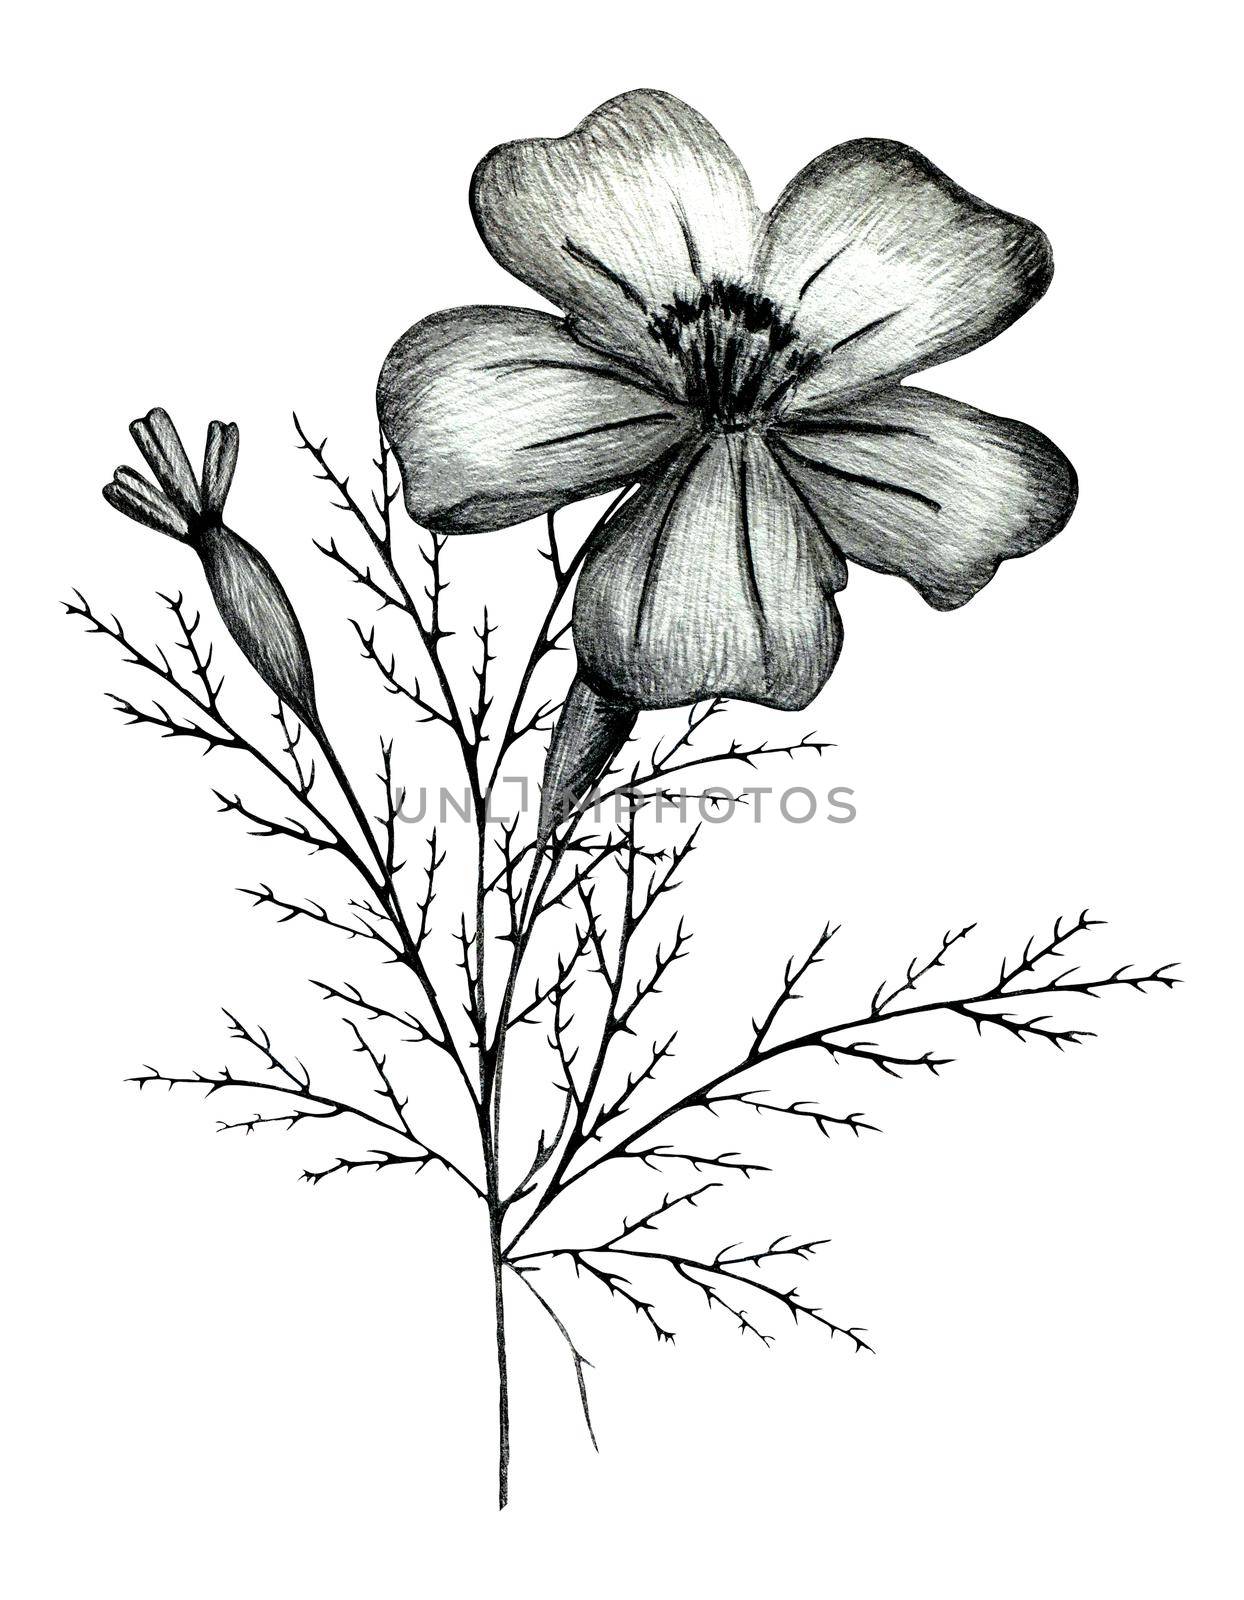 Black and White Hand Drawn Marigold Flower Composition Isolated on White Background. Marigold Flower Composition Drawn by Black Pencil.